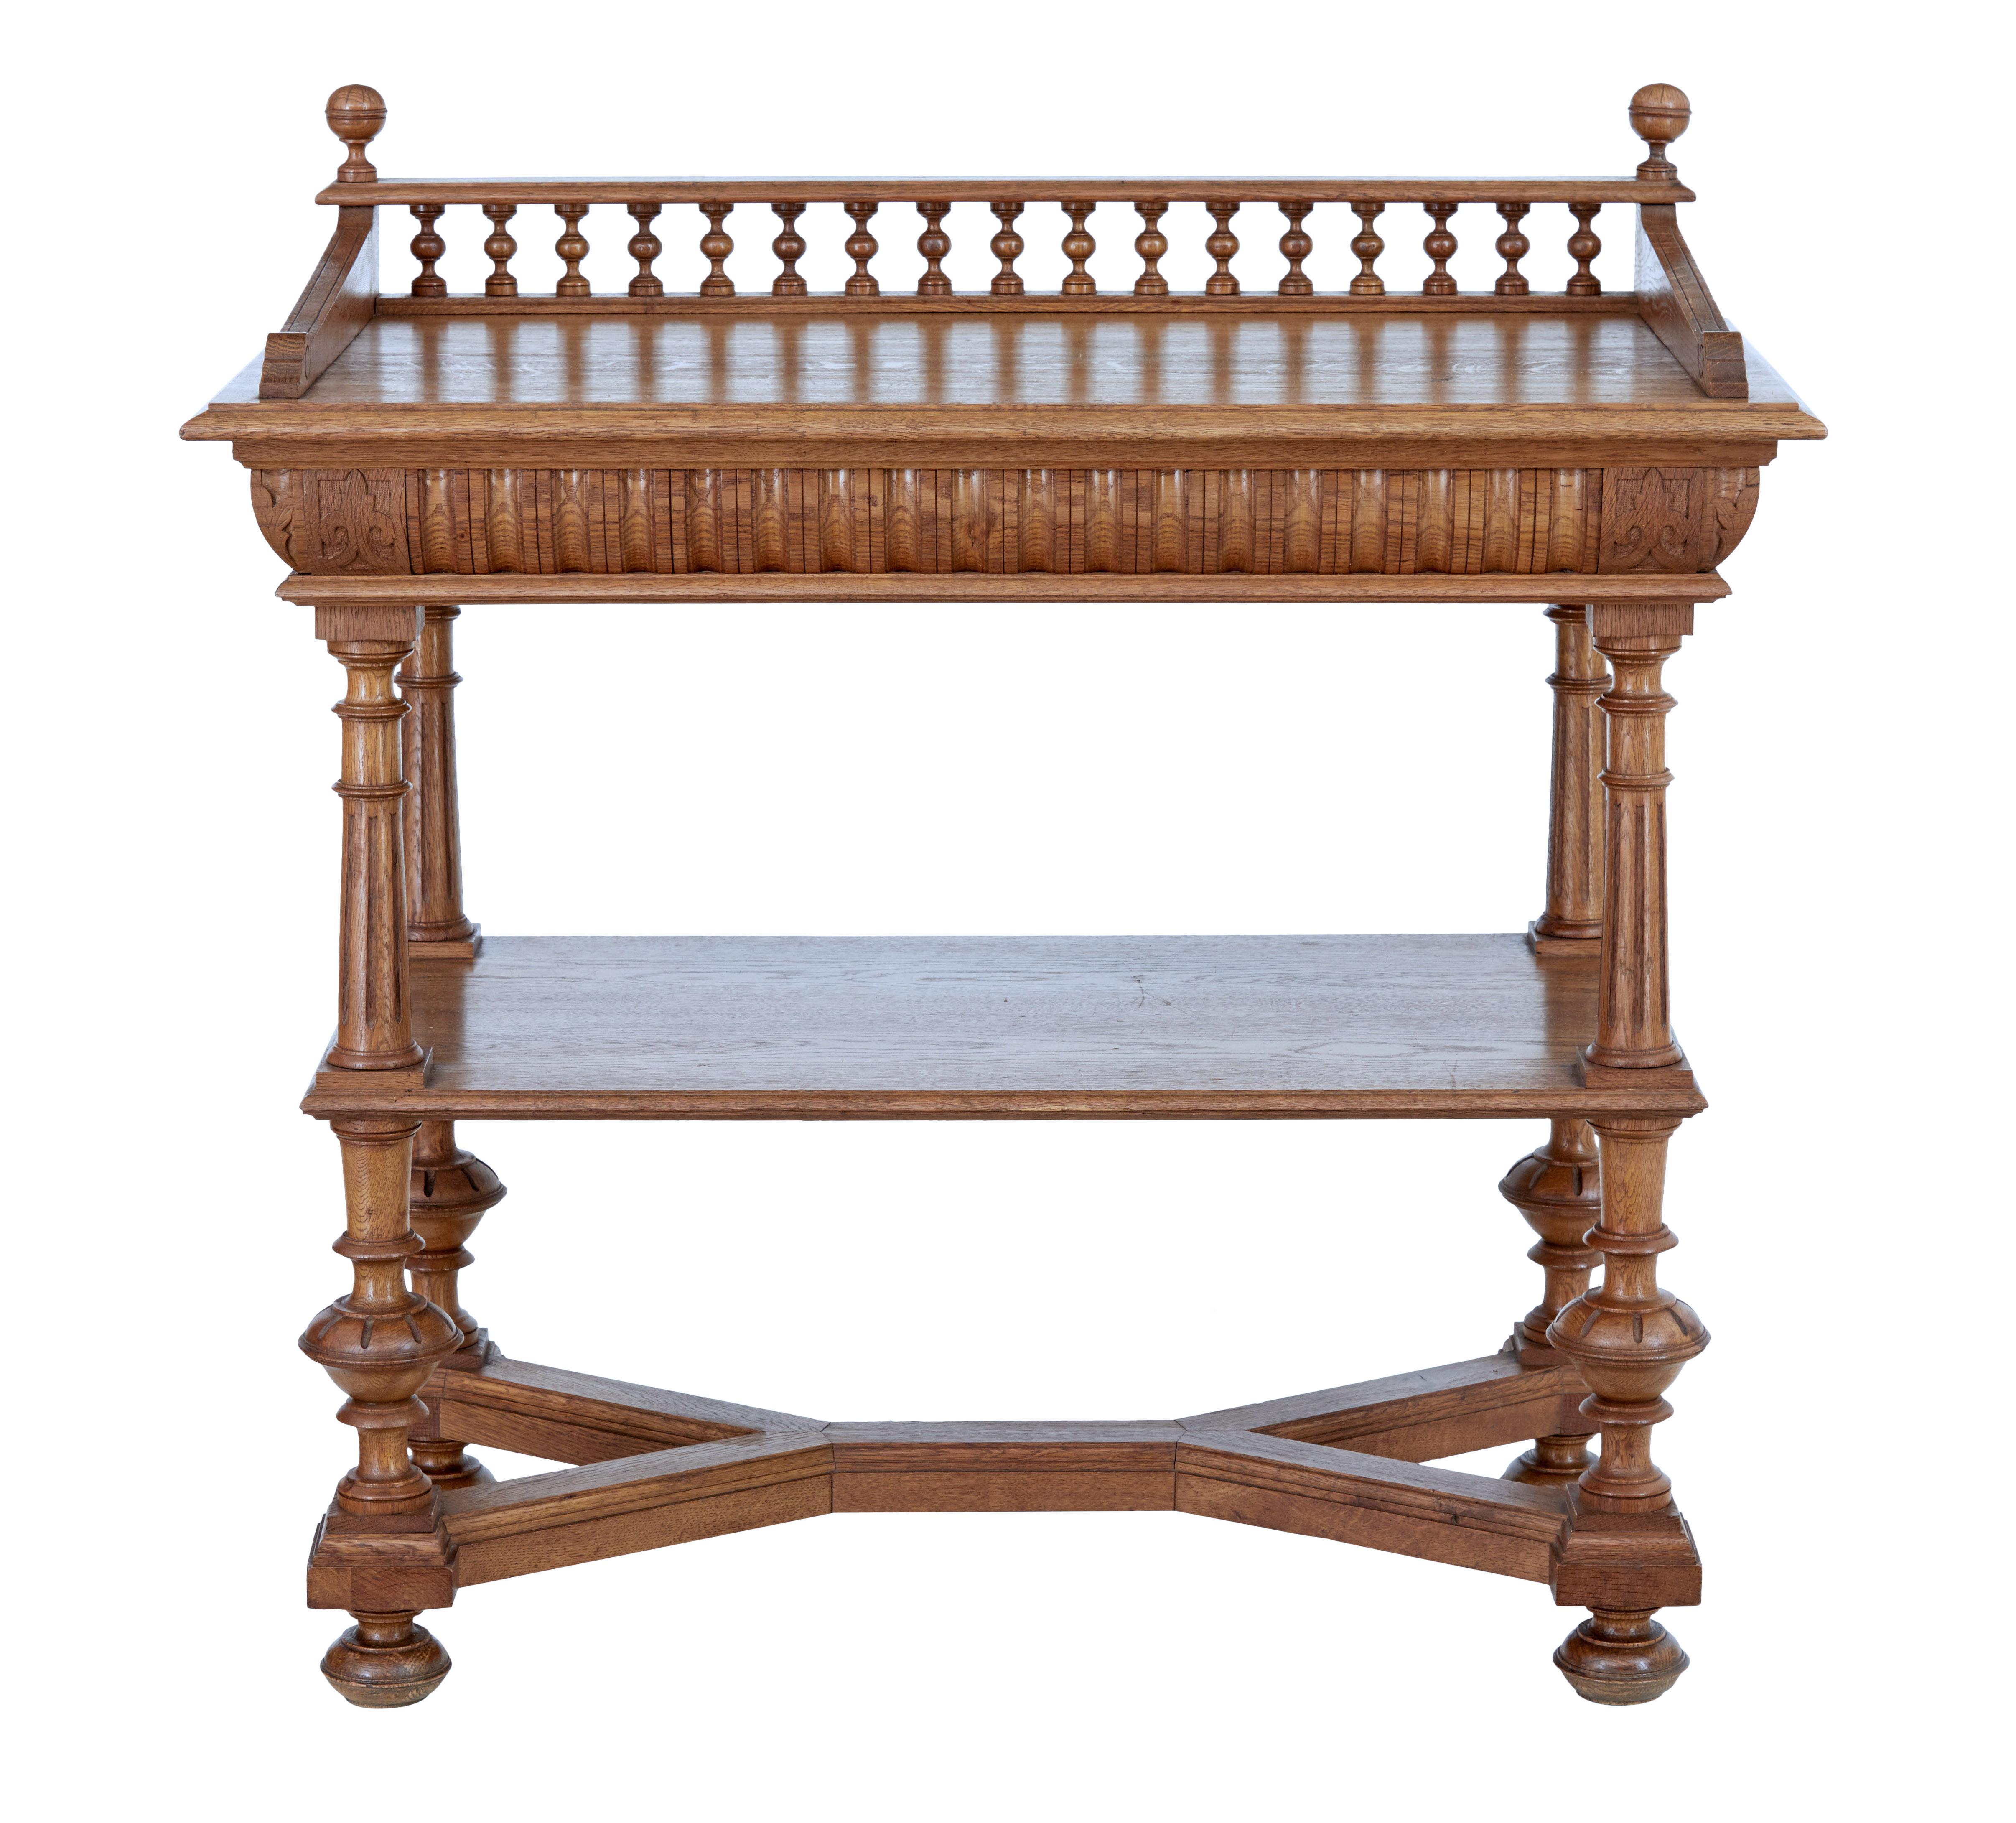 Late 19th century Victorian carved oak washstand, circa 1890.

Victorian wash stand, but with many possible uses such as a side or hall table.

Top surface with spindle gallery surround, standing on 4 turned legs which support a further shelf.